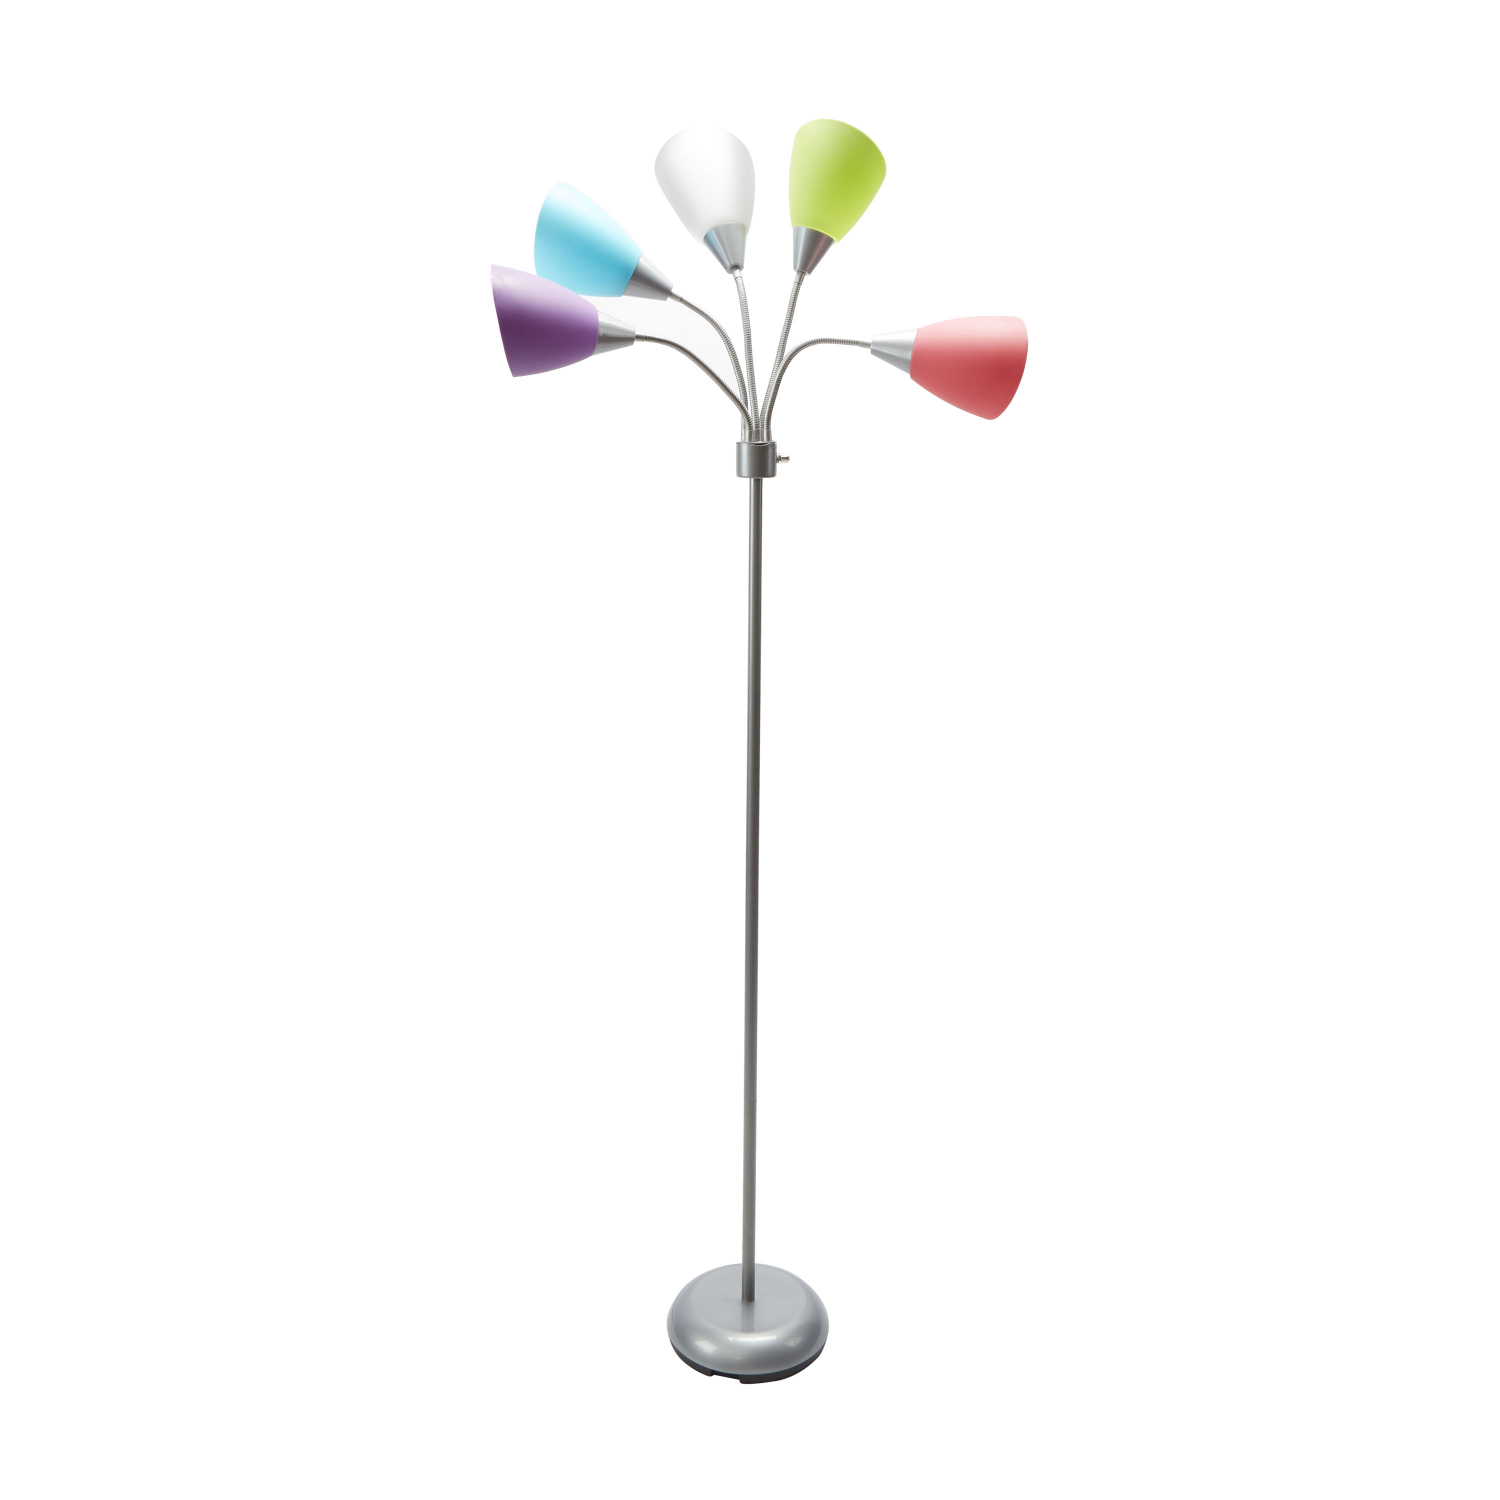 Details About Floor Lamp Stand W 5 Multi Color Light Shade Adjustable Arm Room Lighting Dorm intended for sizing 1500 X 1500